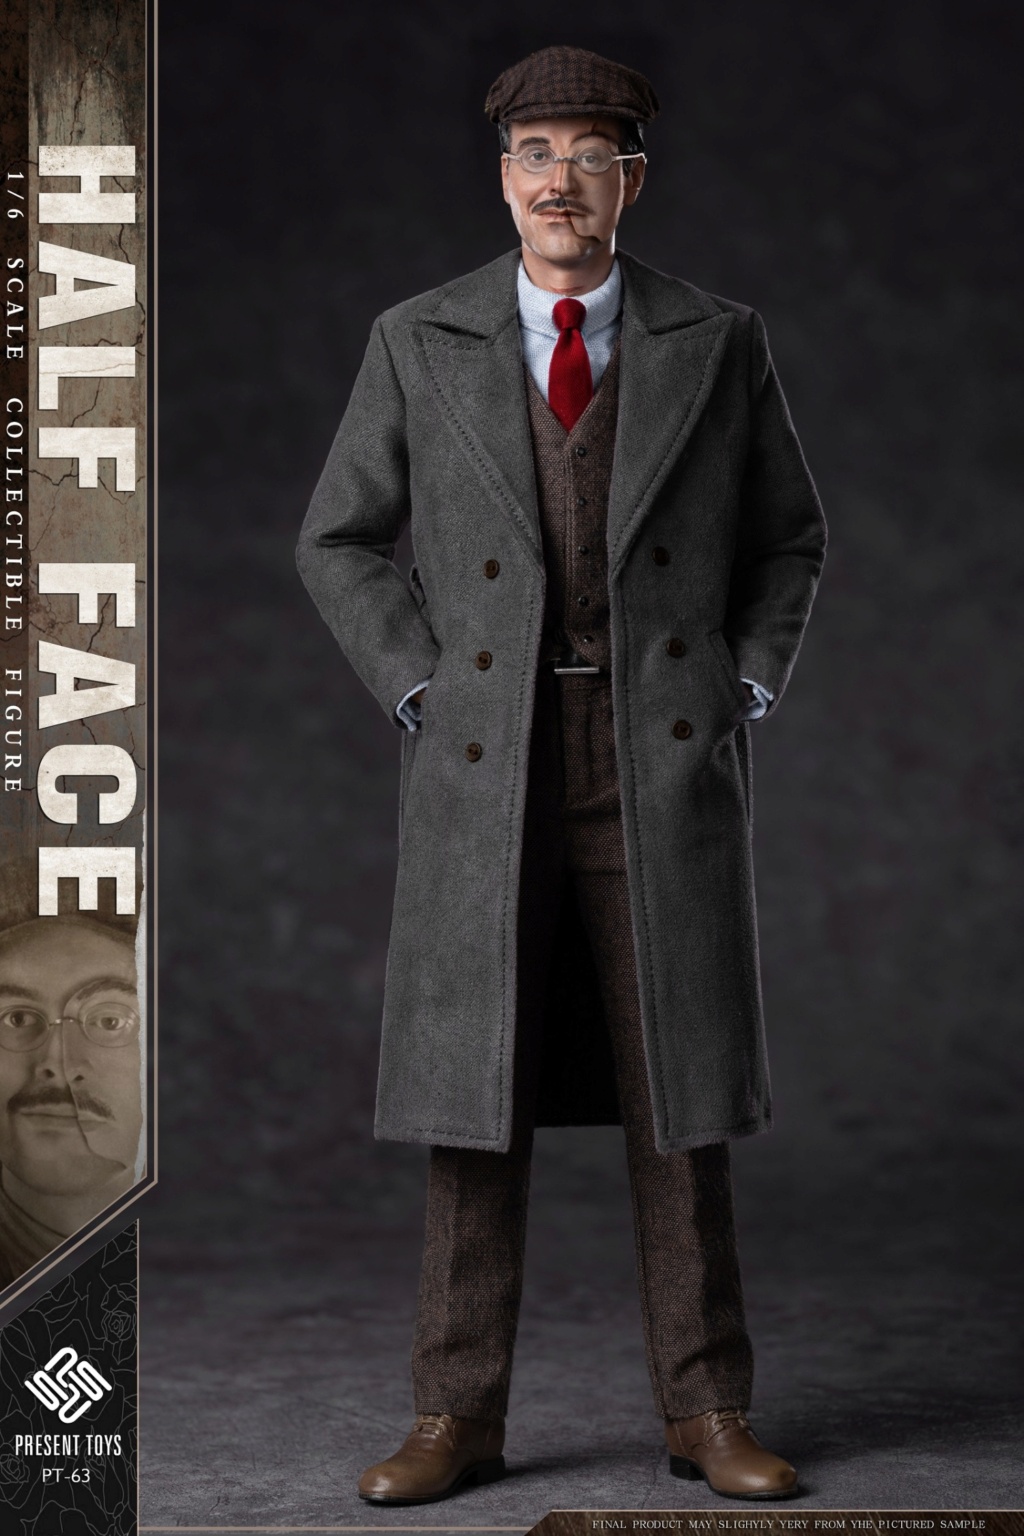 newproduct - NEW PRODUCT: PRESENT TOYS  1:6 collectiblefigure – Half Face. 19270710